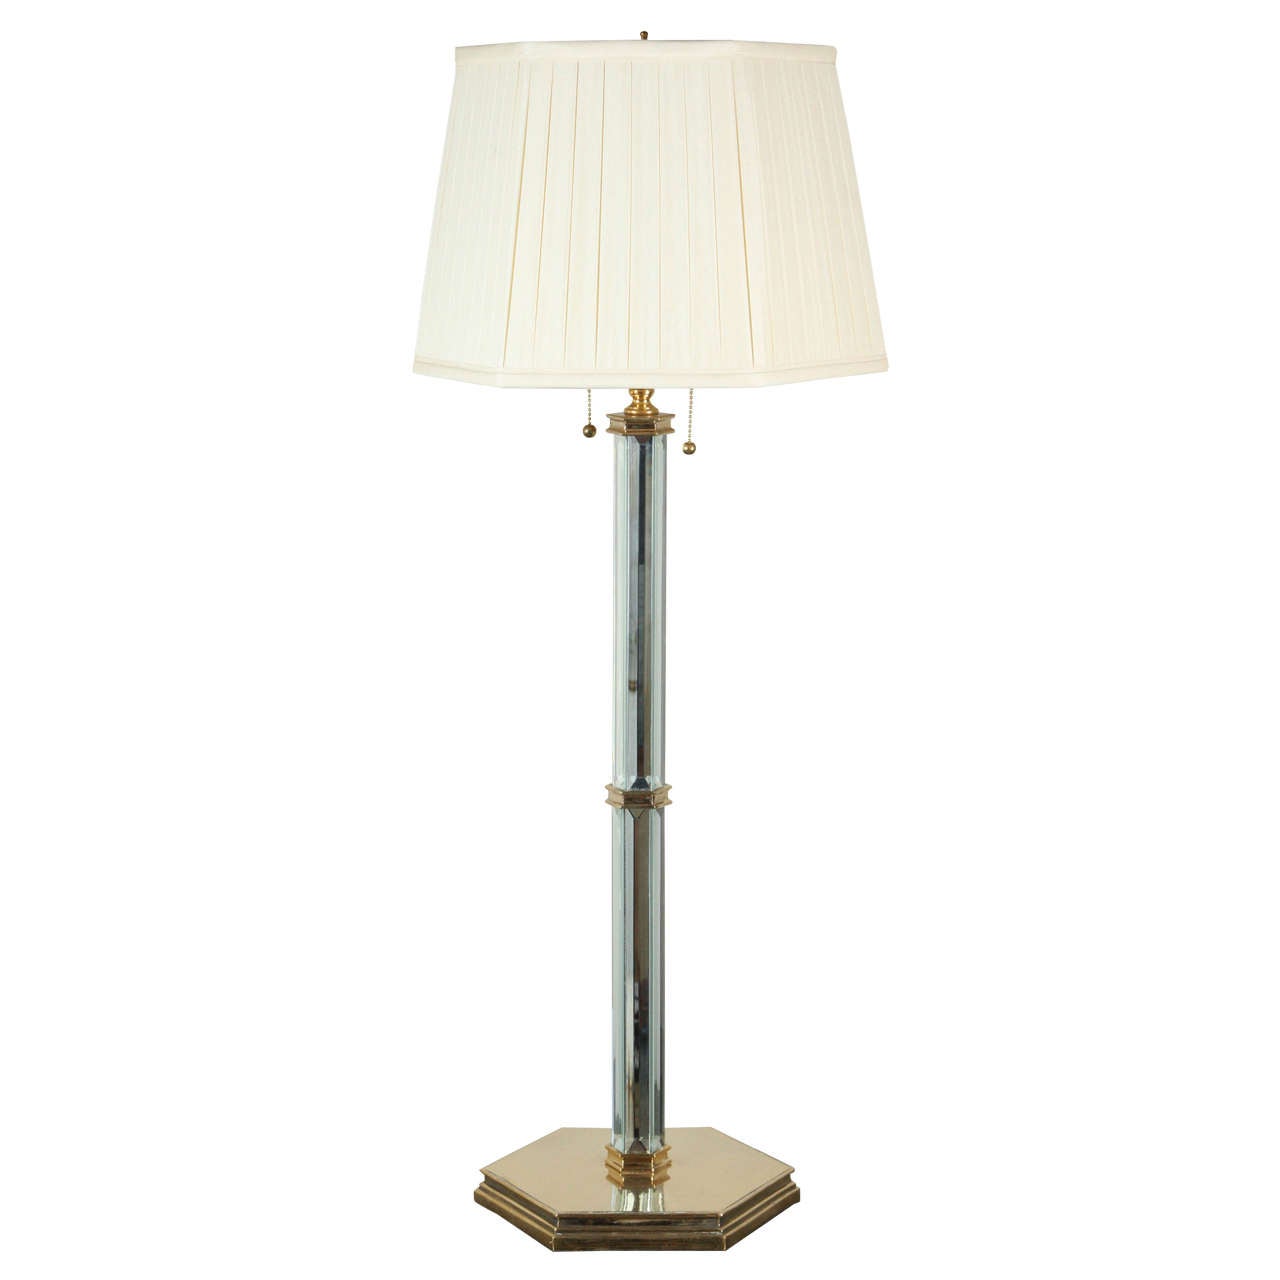 Paul Marra Brass and Beveled Mirror Table Lamp For Sale